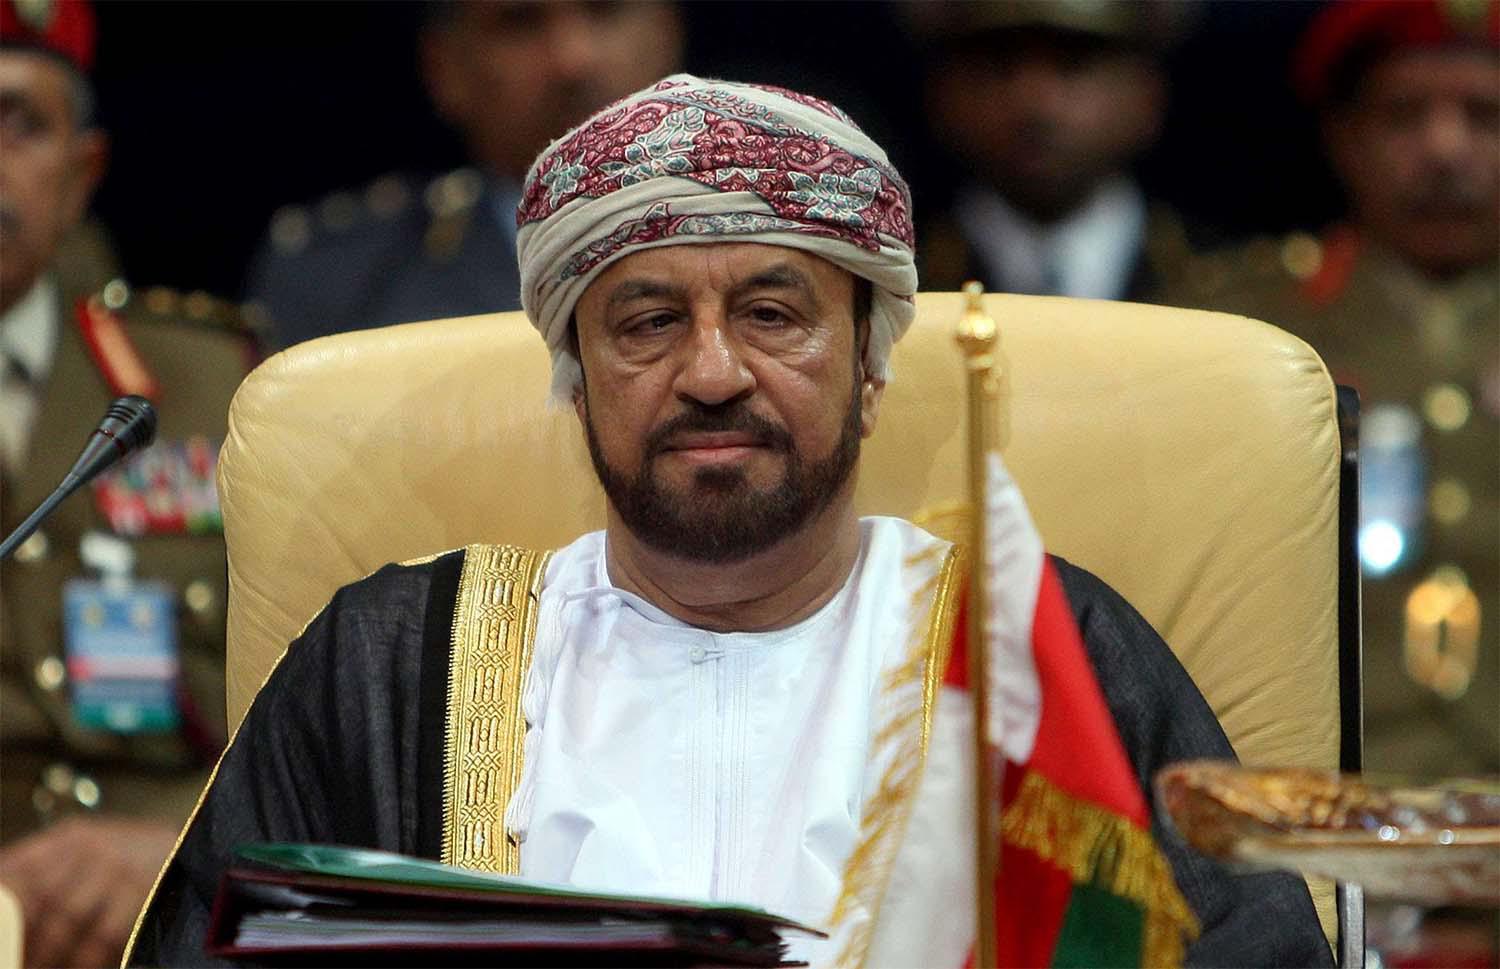 Busaidi reiterated Oman's longstanding policy of neutrality in a turbulent region